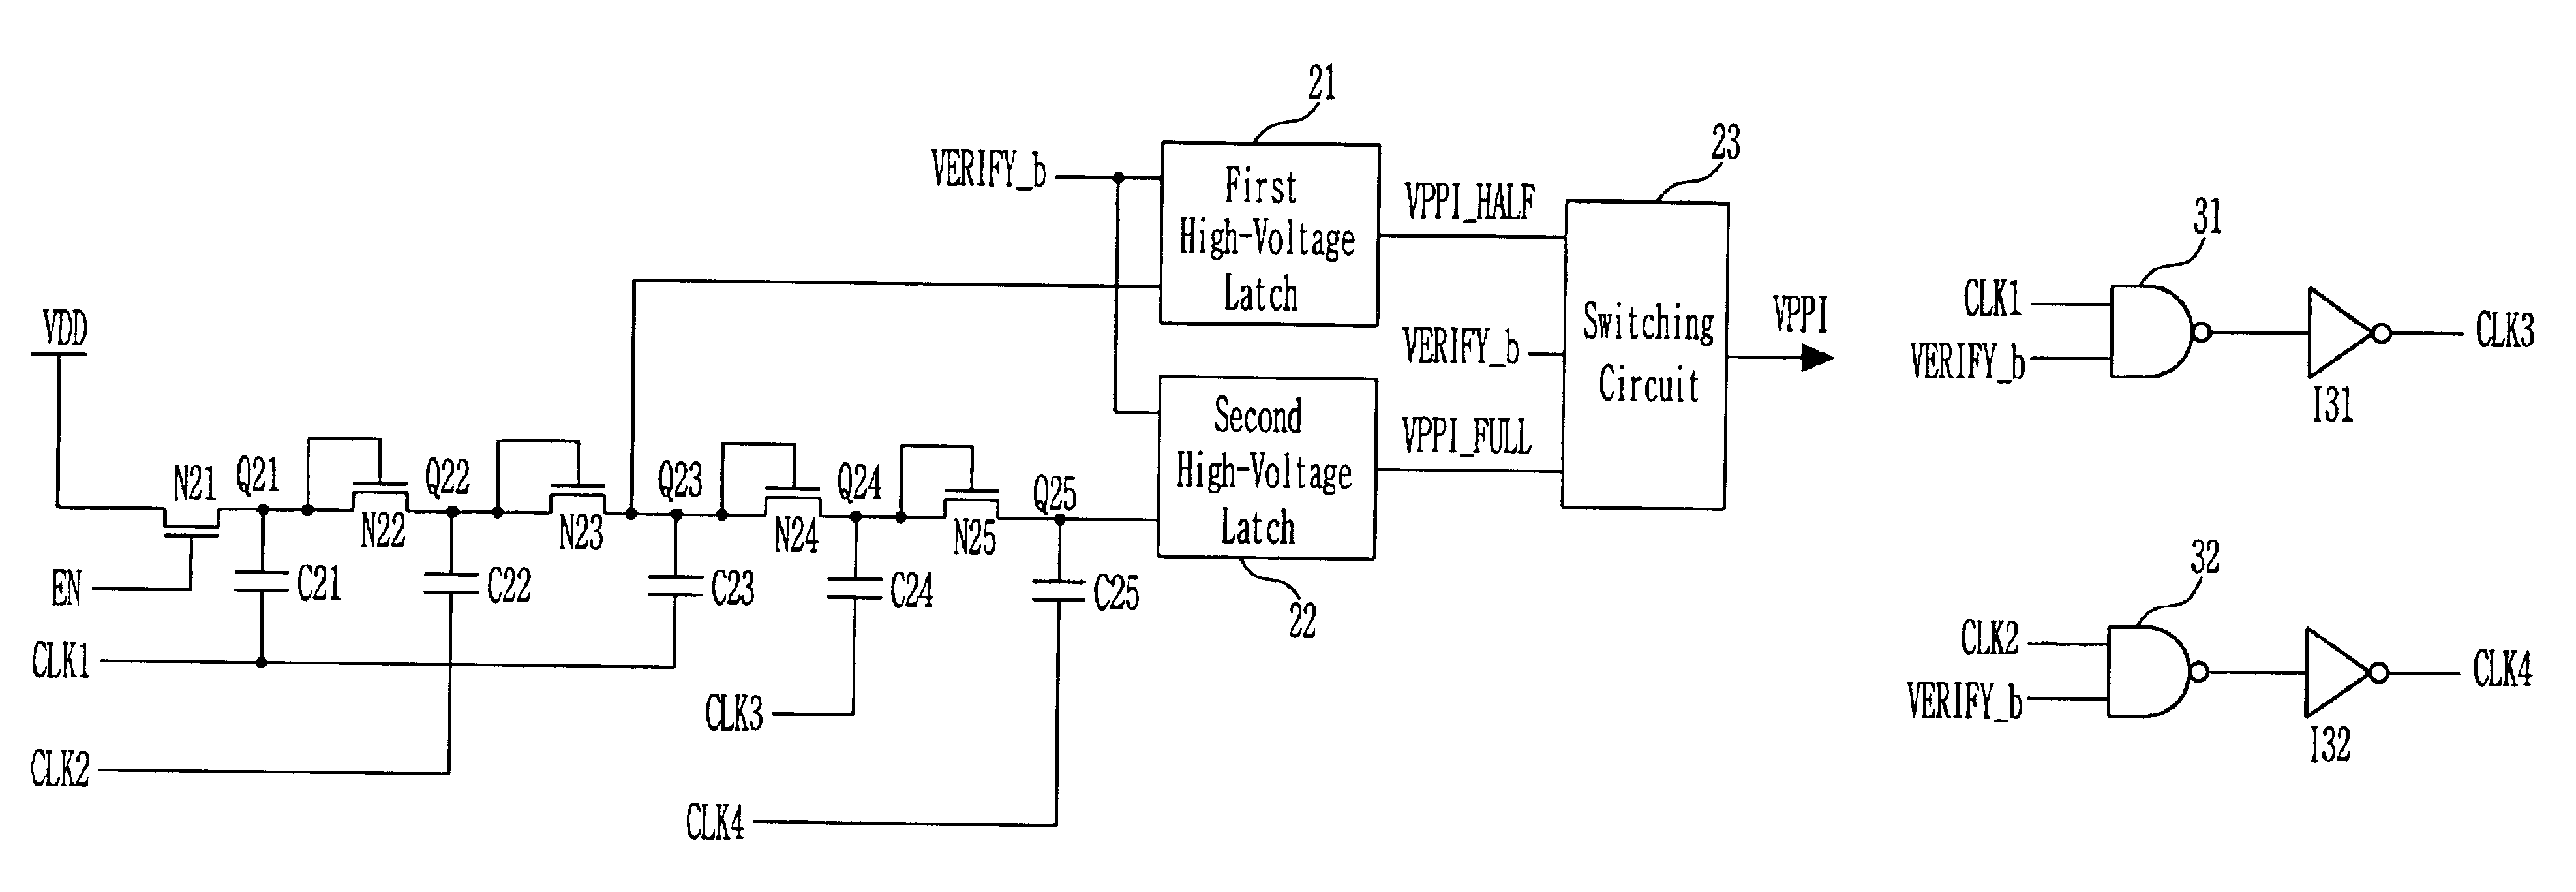 Pumping circuit for outputting program voltage and program verify voltage of different levels